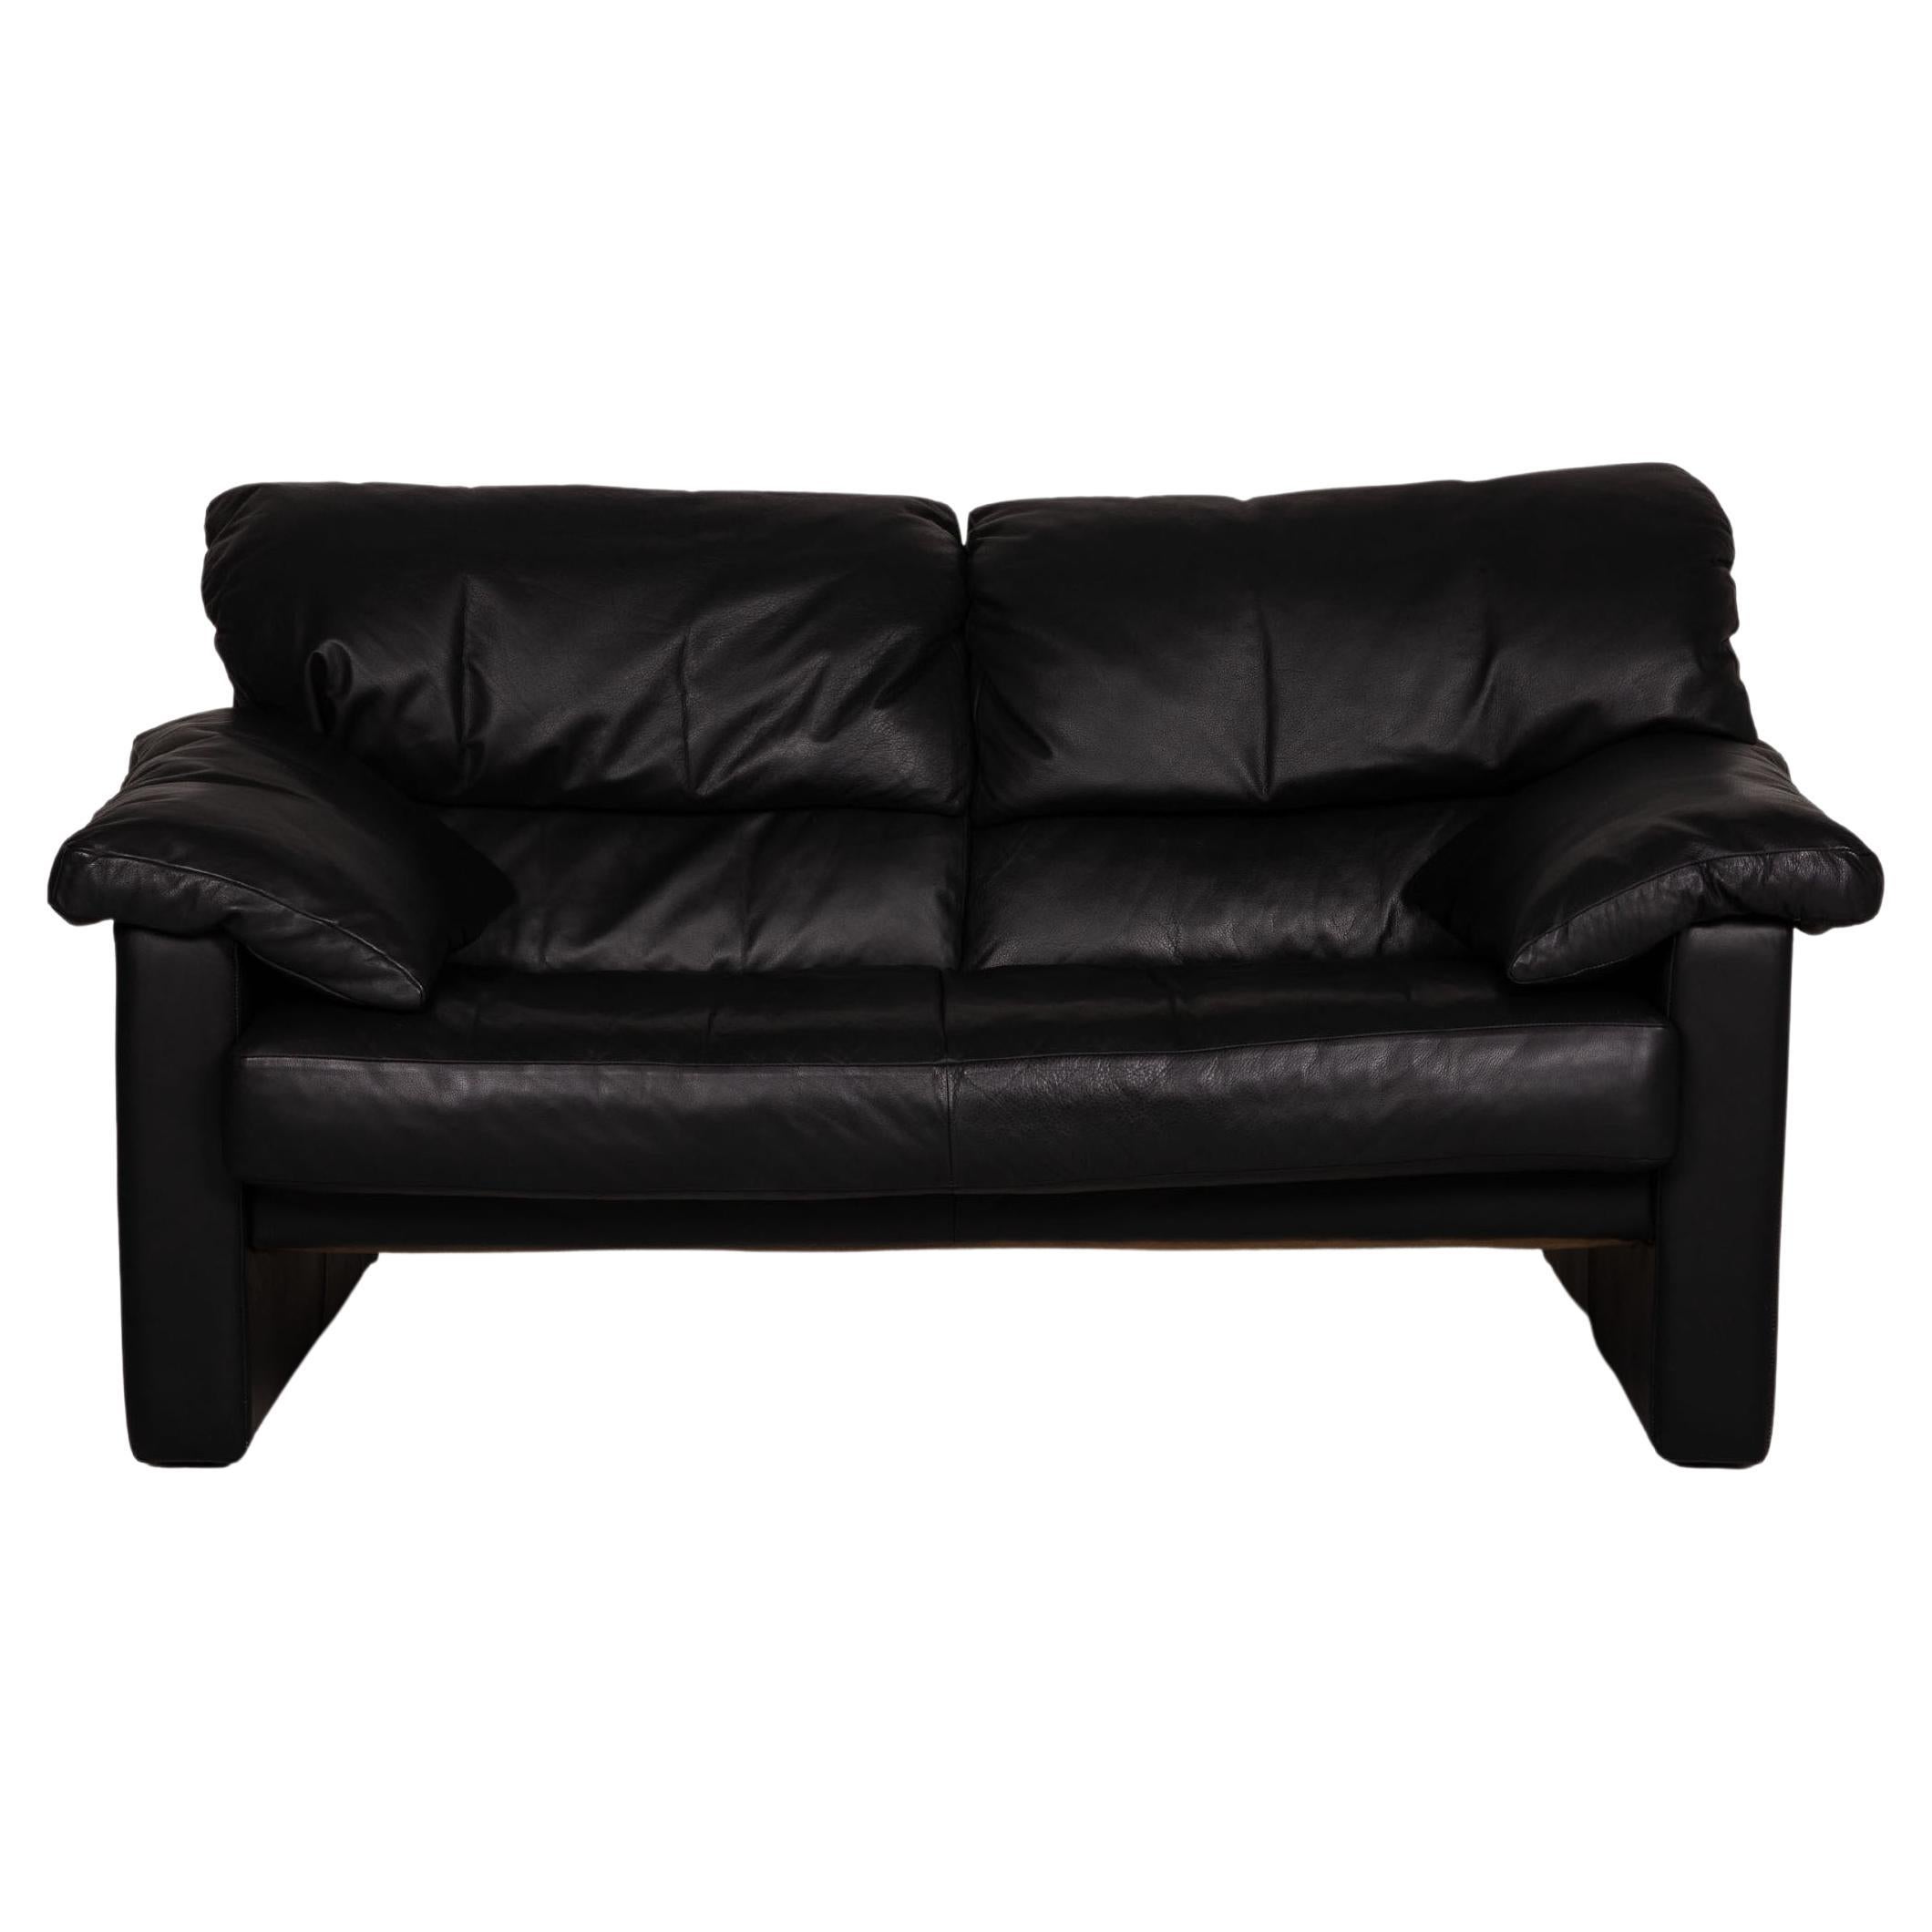 WK Wohnen Leather Sofa Black Two-Seater Couch For Sale